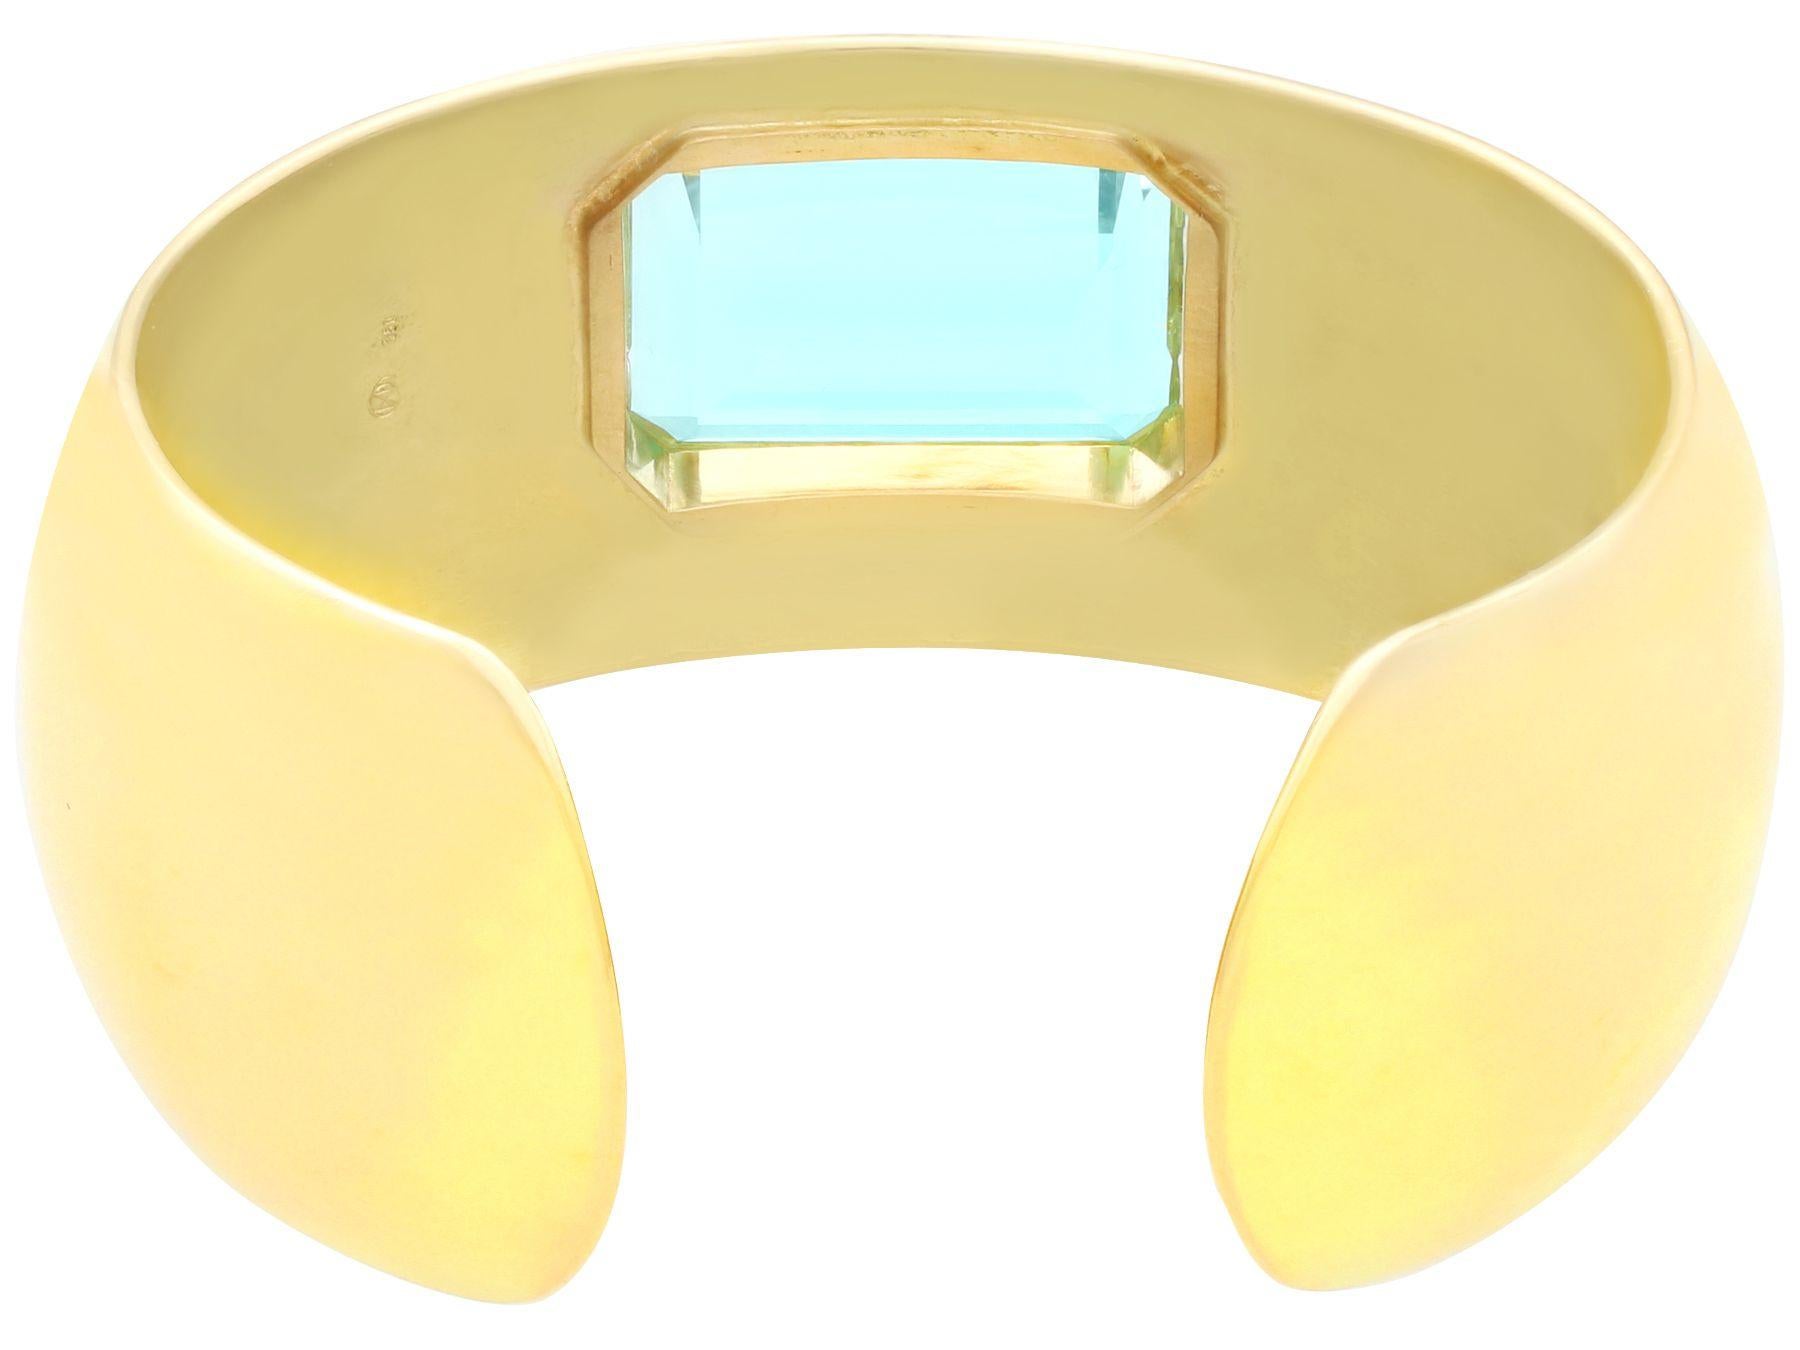 Vintage 40.35 Carat Aquamarine and 18k Yellow Gold Cuff Bangle In Excellent Condition For Sale In Jesmond, Newcastle Upon Tyne